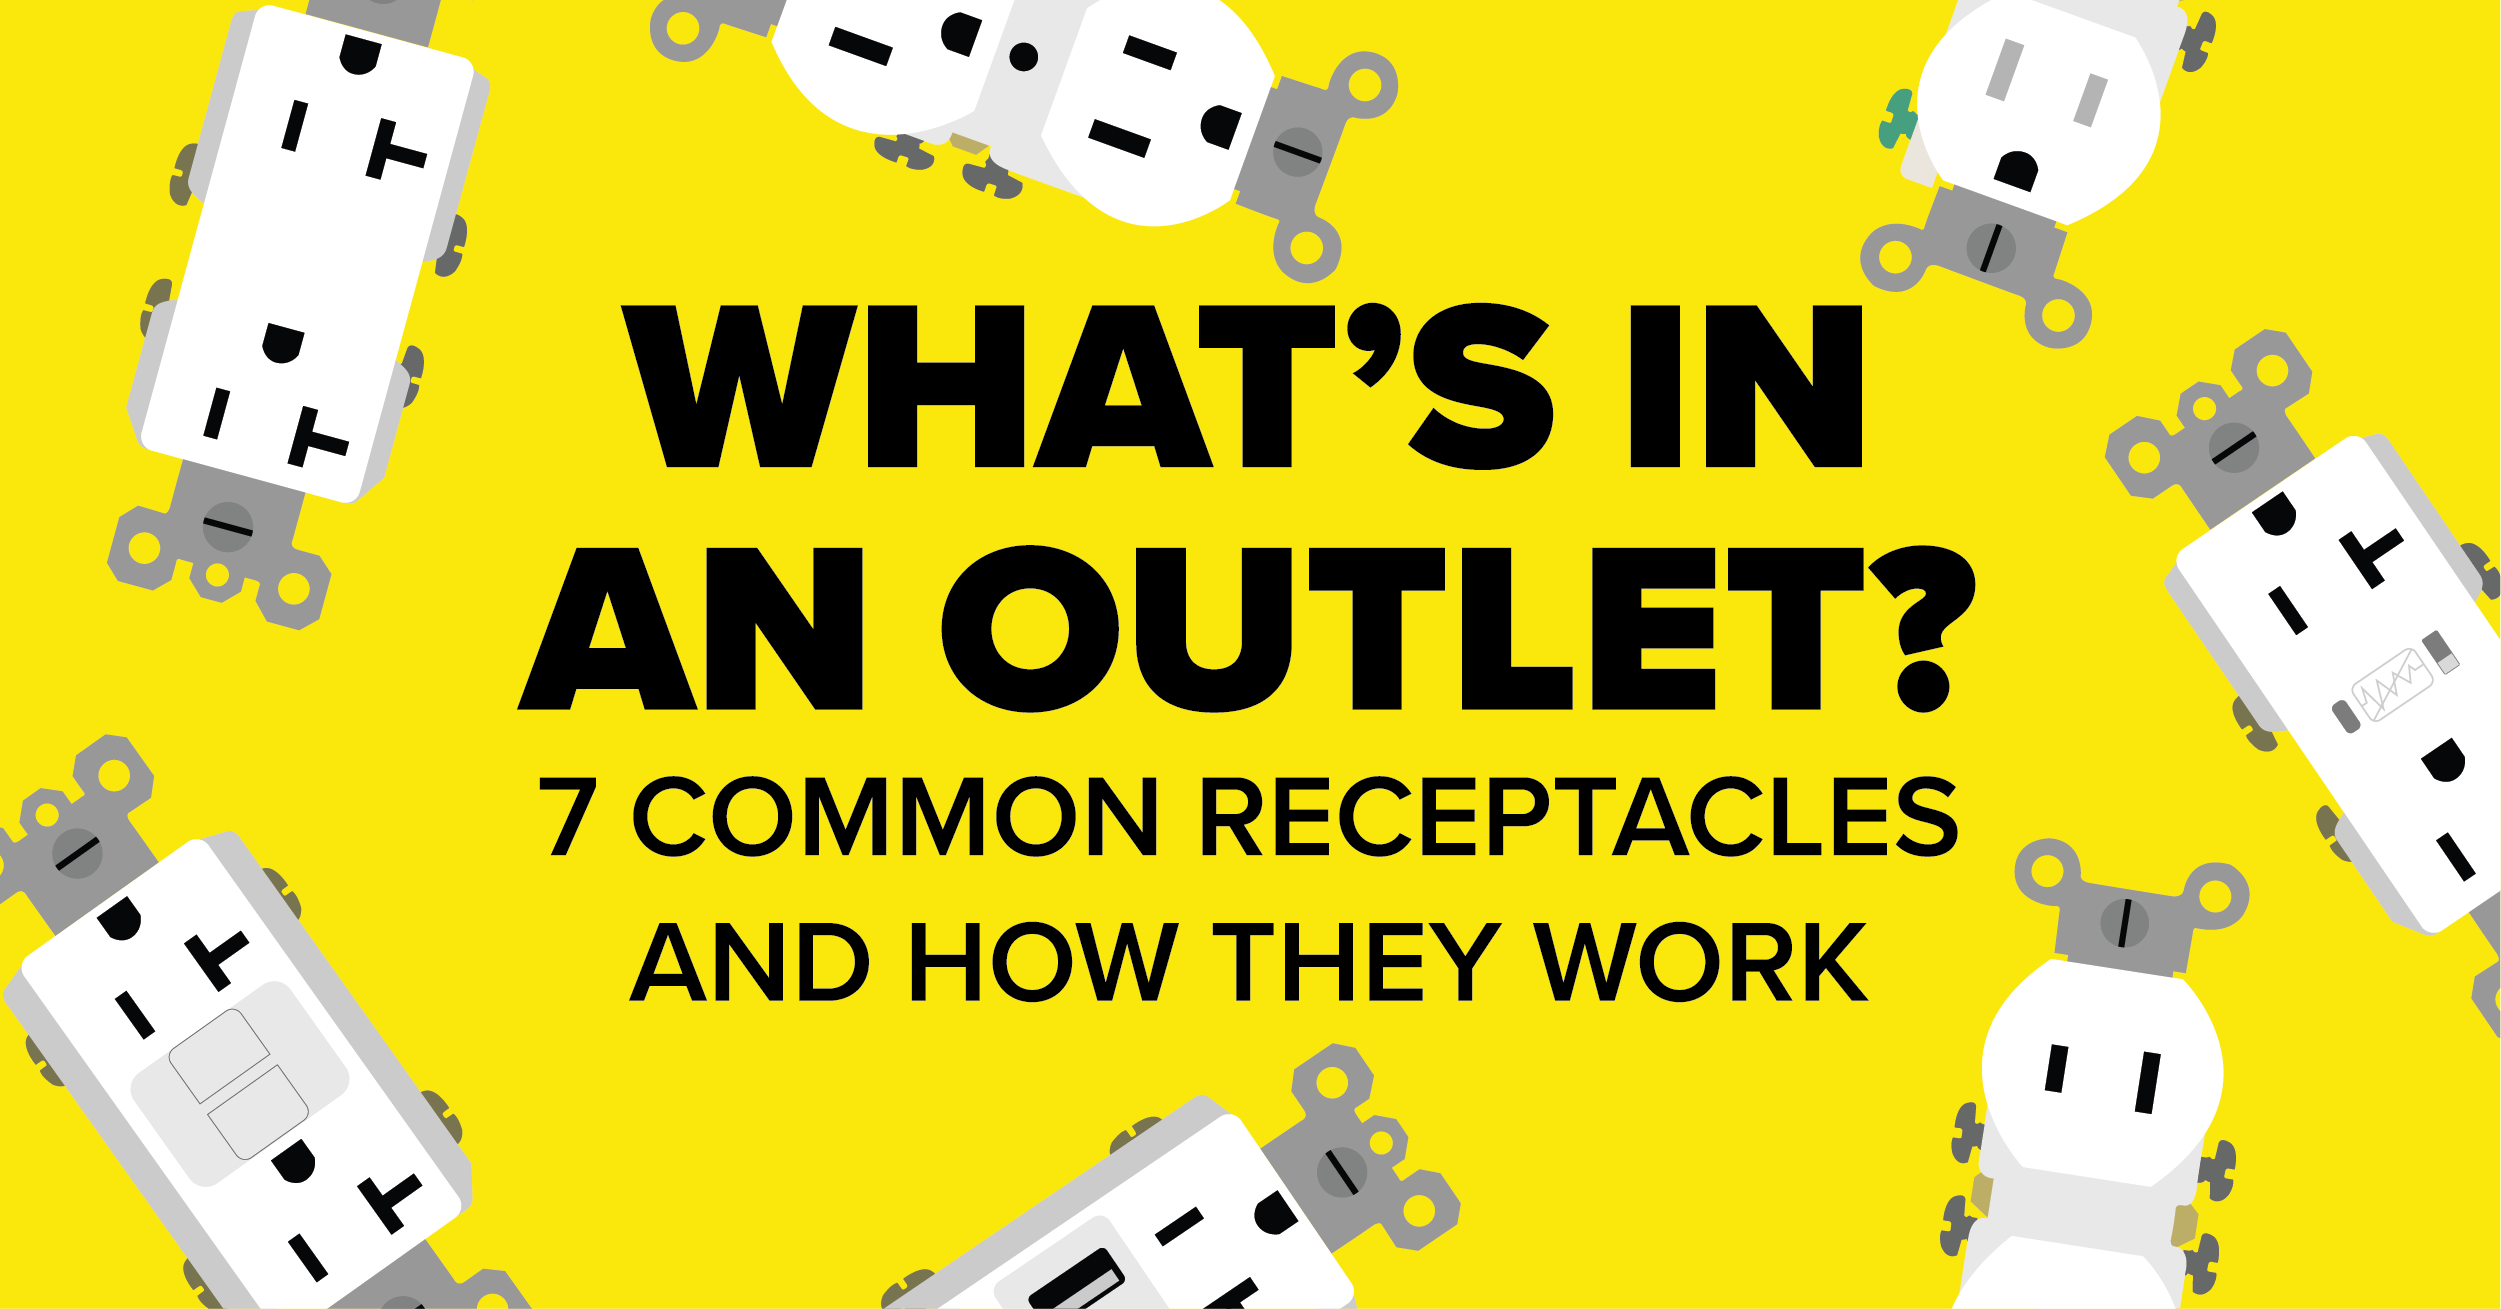 What's In An Outlet